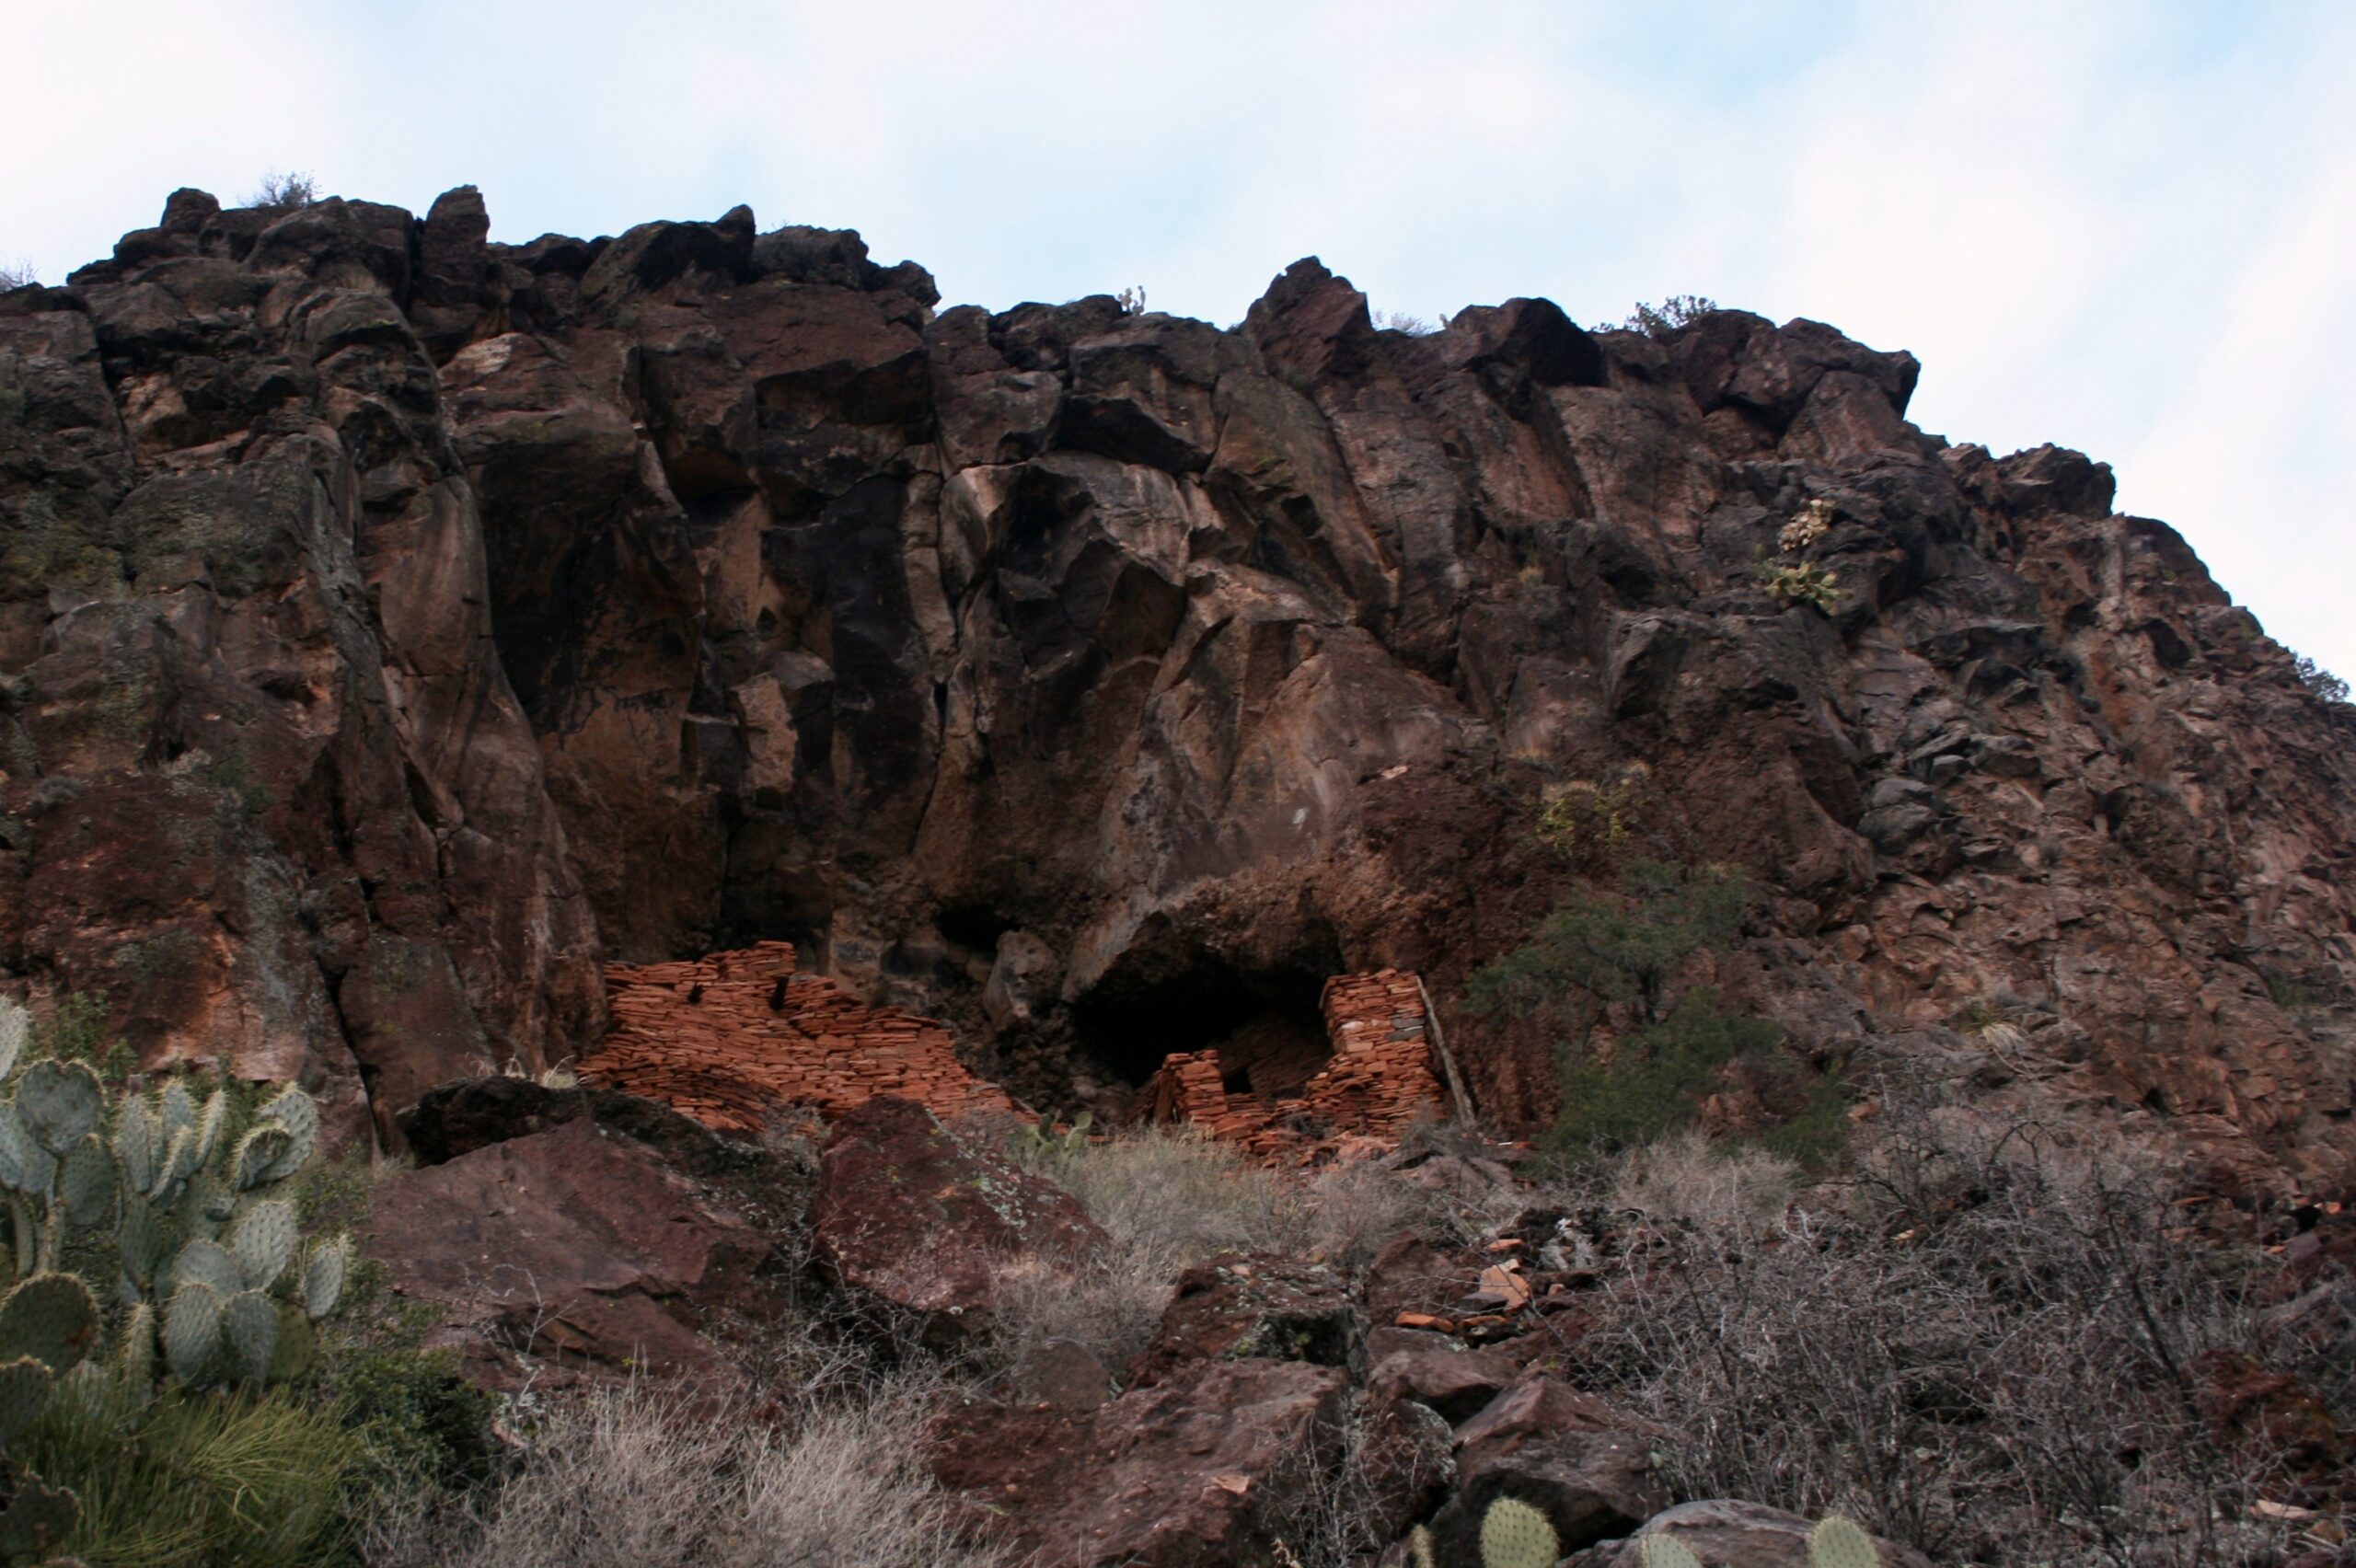 A cliff dwelling built by the Verde Hohokam sits on the rim of Sycamore Canyon in Arizona.